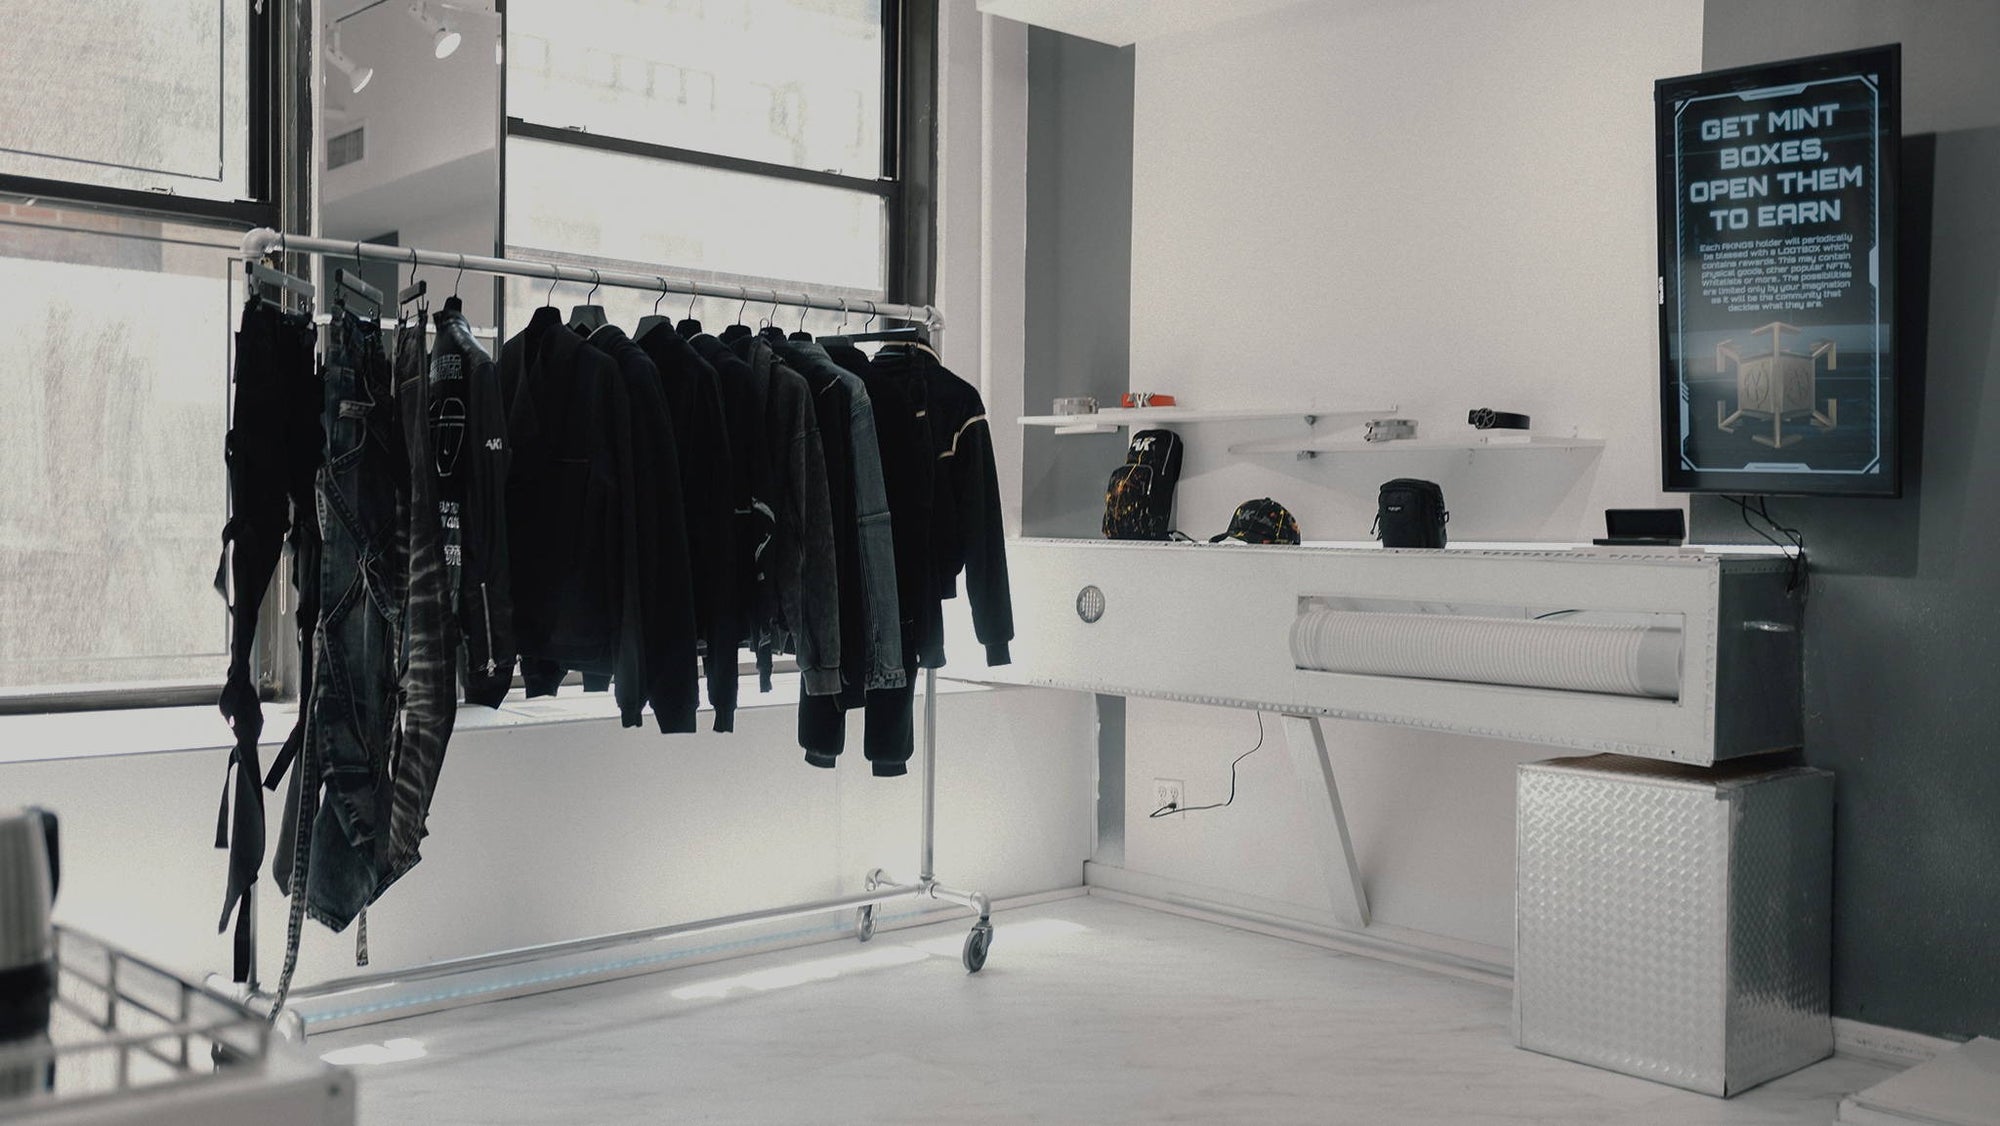 THE STREETWEAR SHOPS GUIDE: NEW YORK CITY